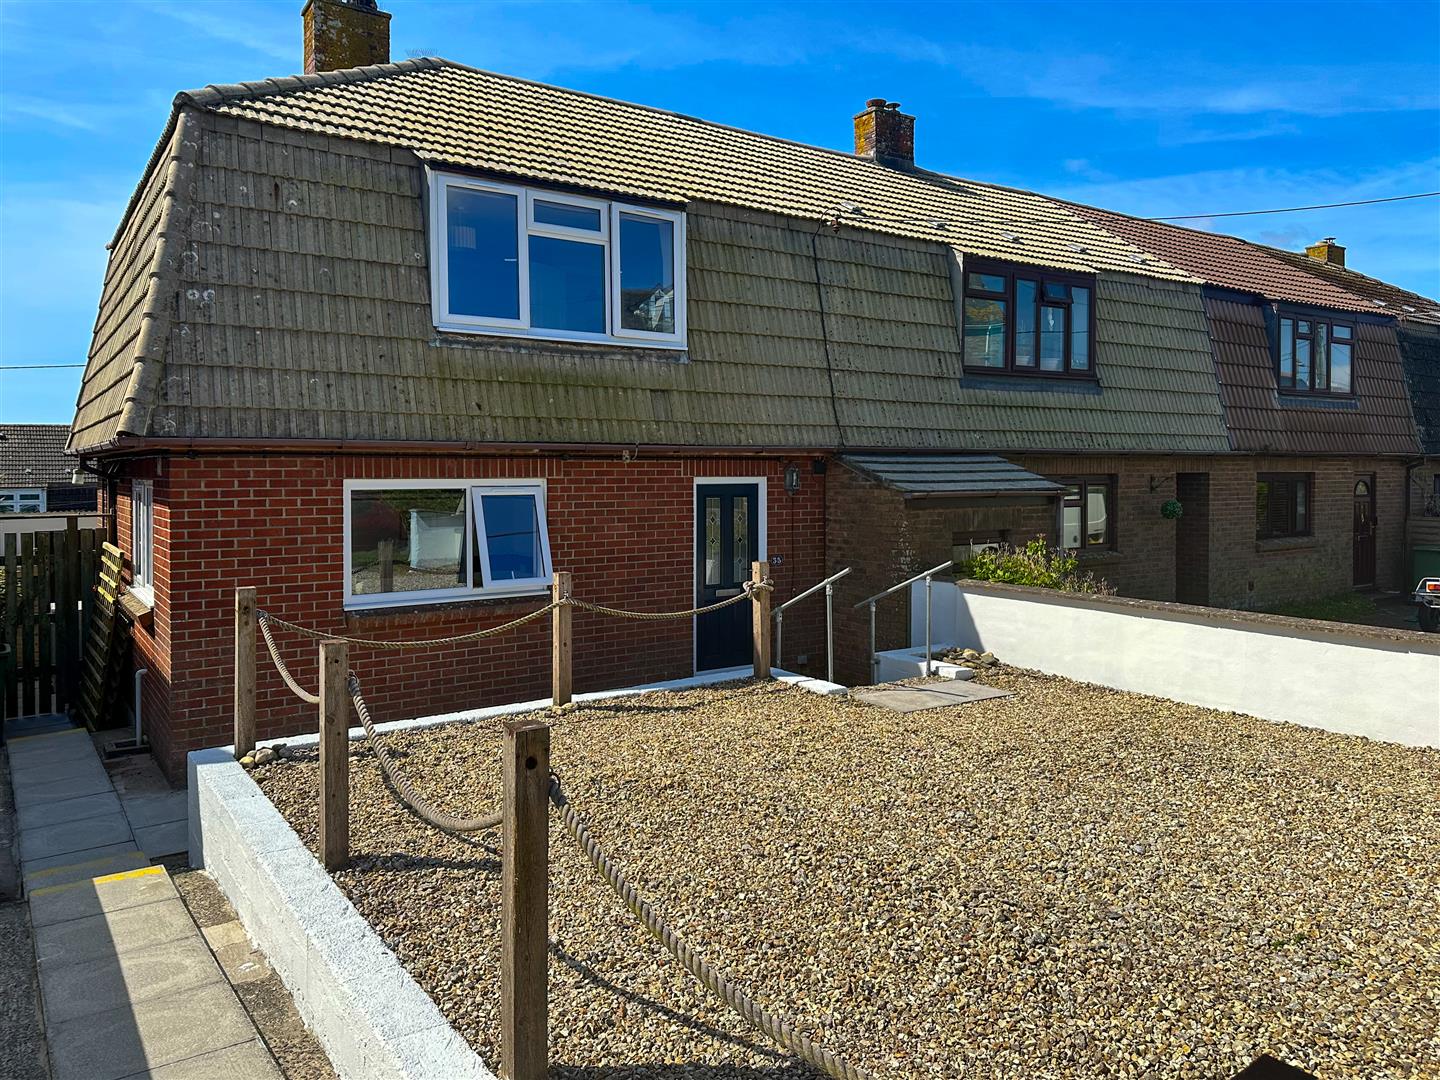 LOCAL BUYERS HOME WITH SEA VIEWS, MARAZION